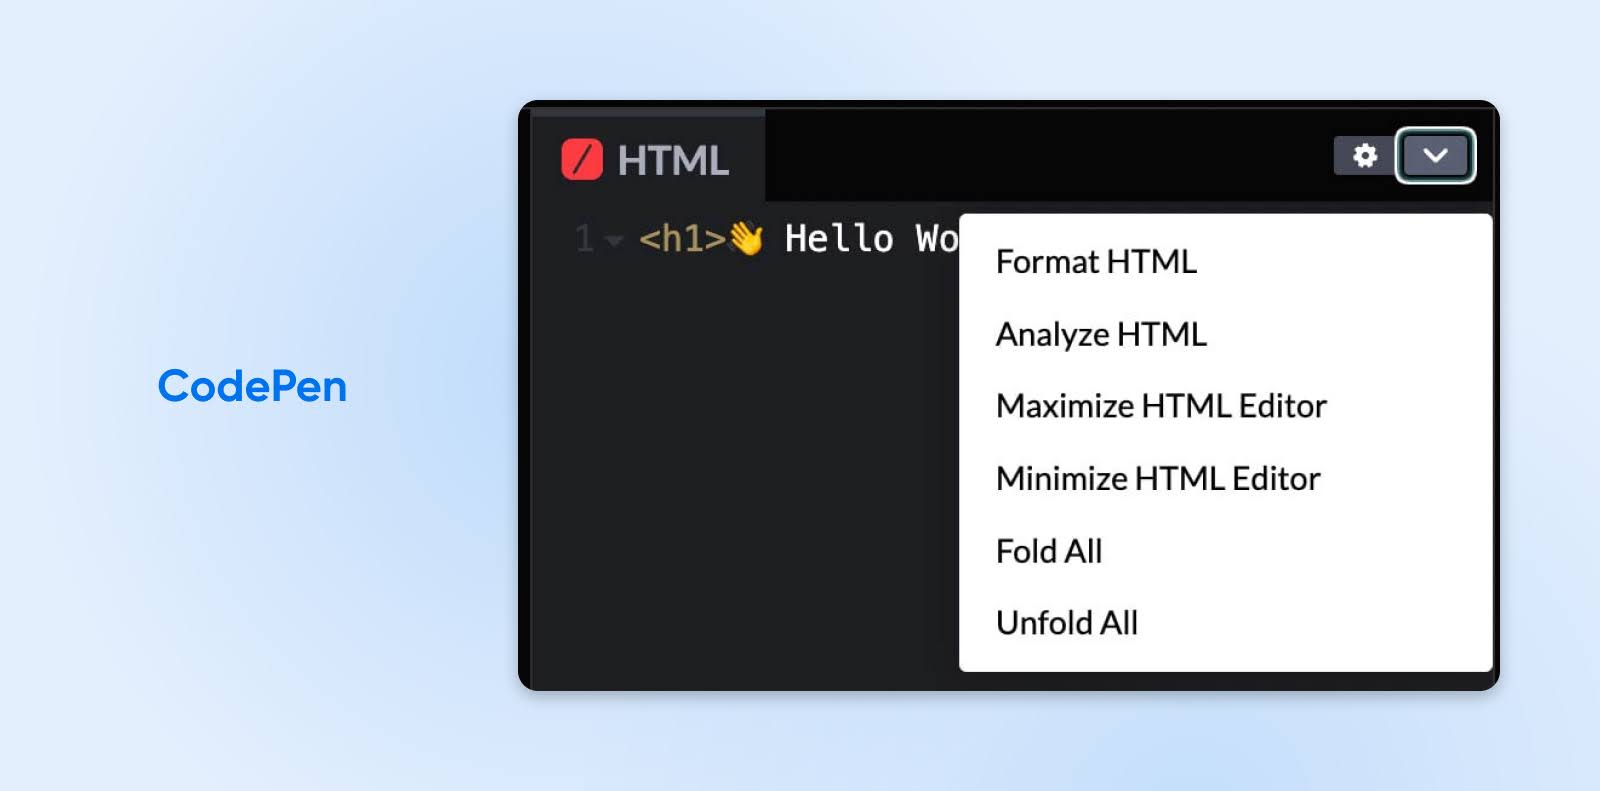 CodePen offers a tool called Analyze HTML to look for code errors